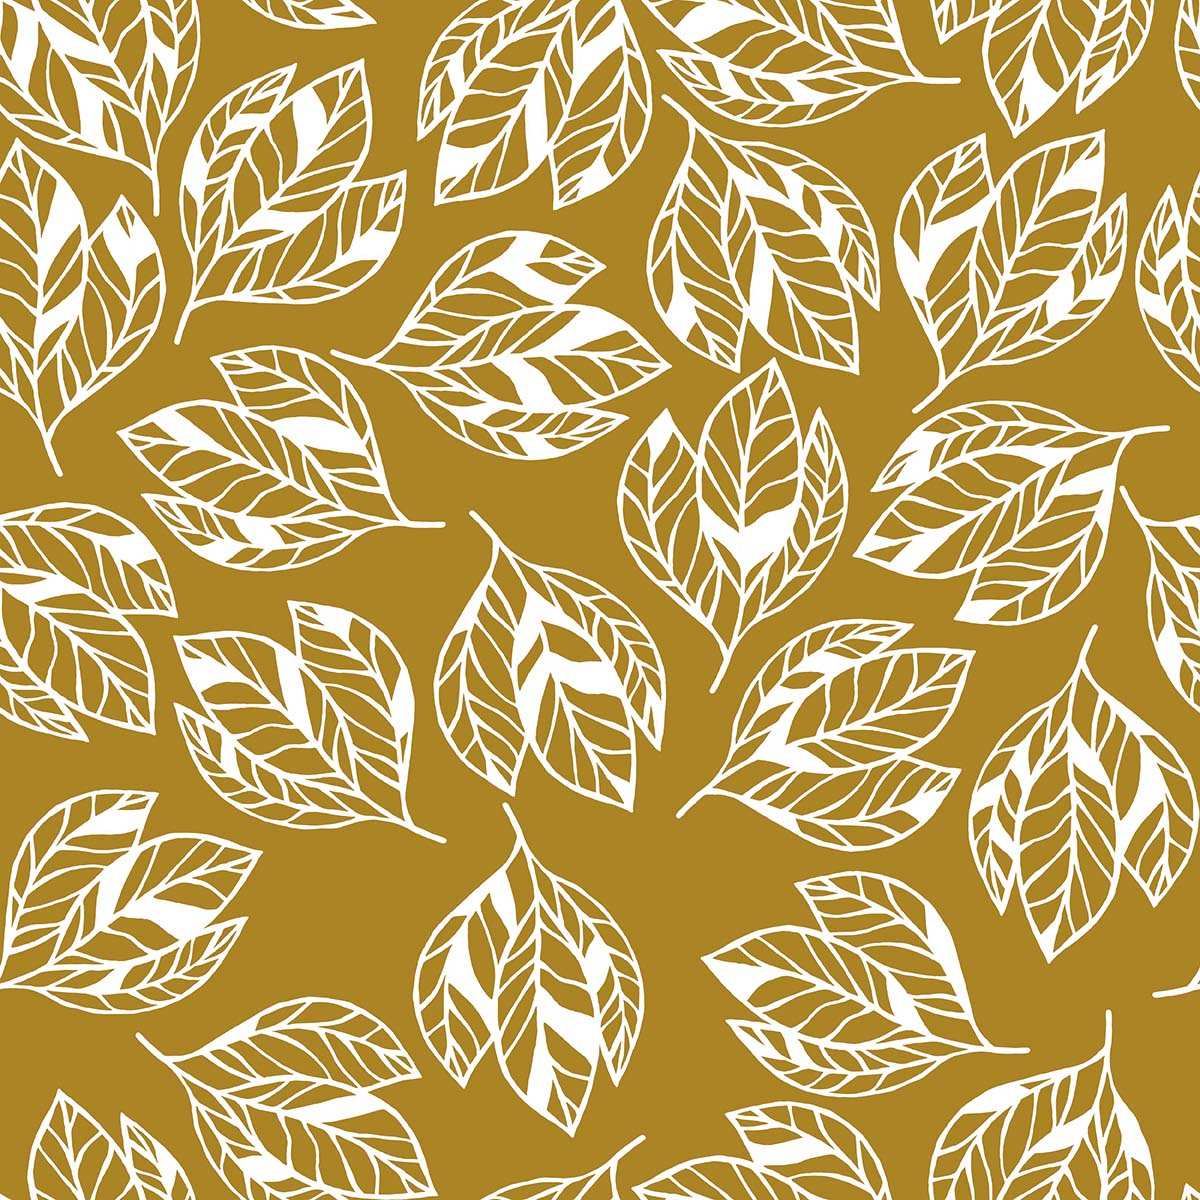 A pattern of white leaves on a yellow background